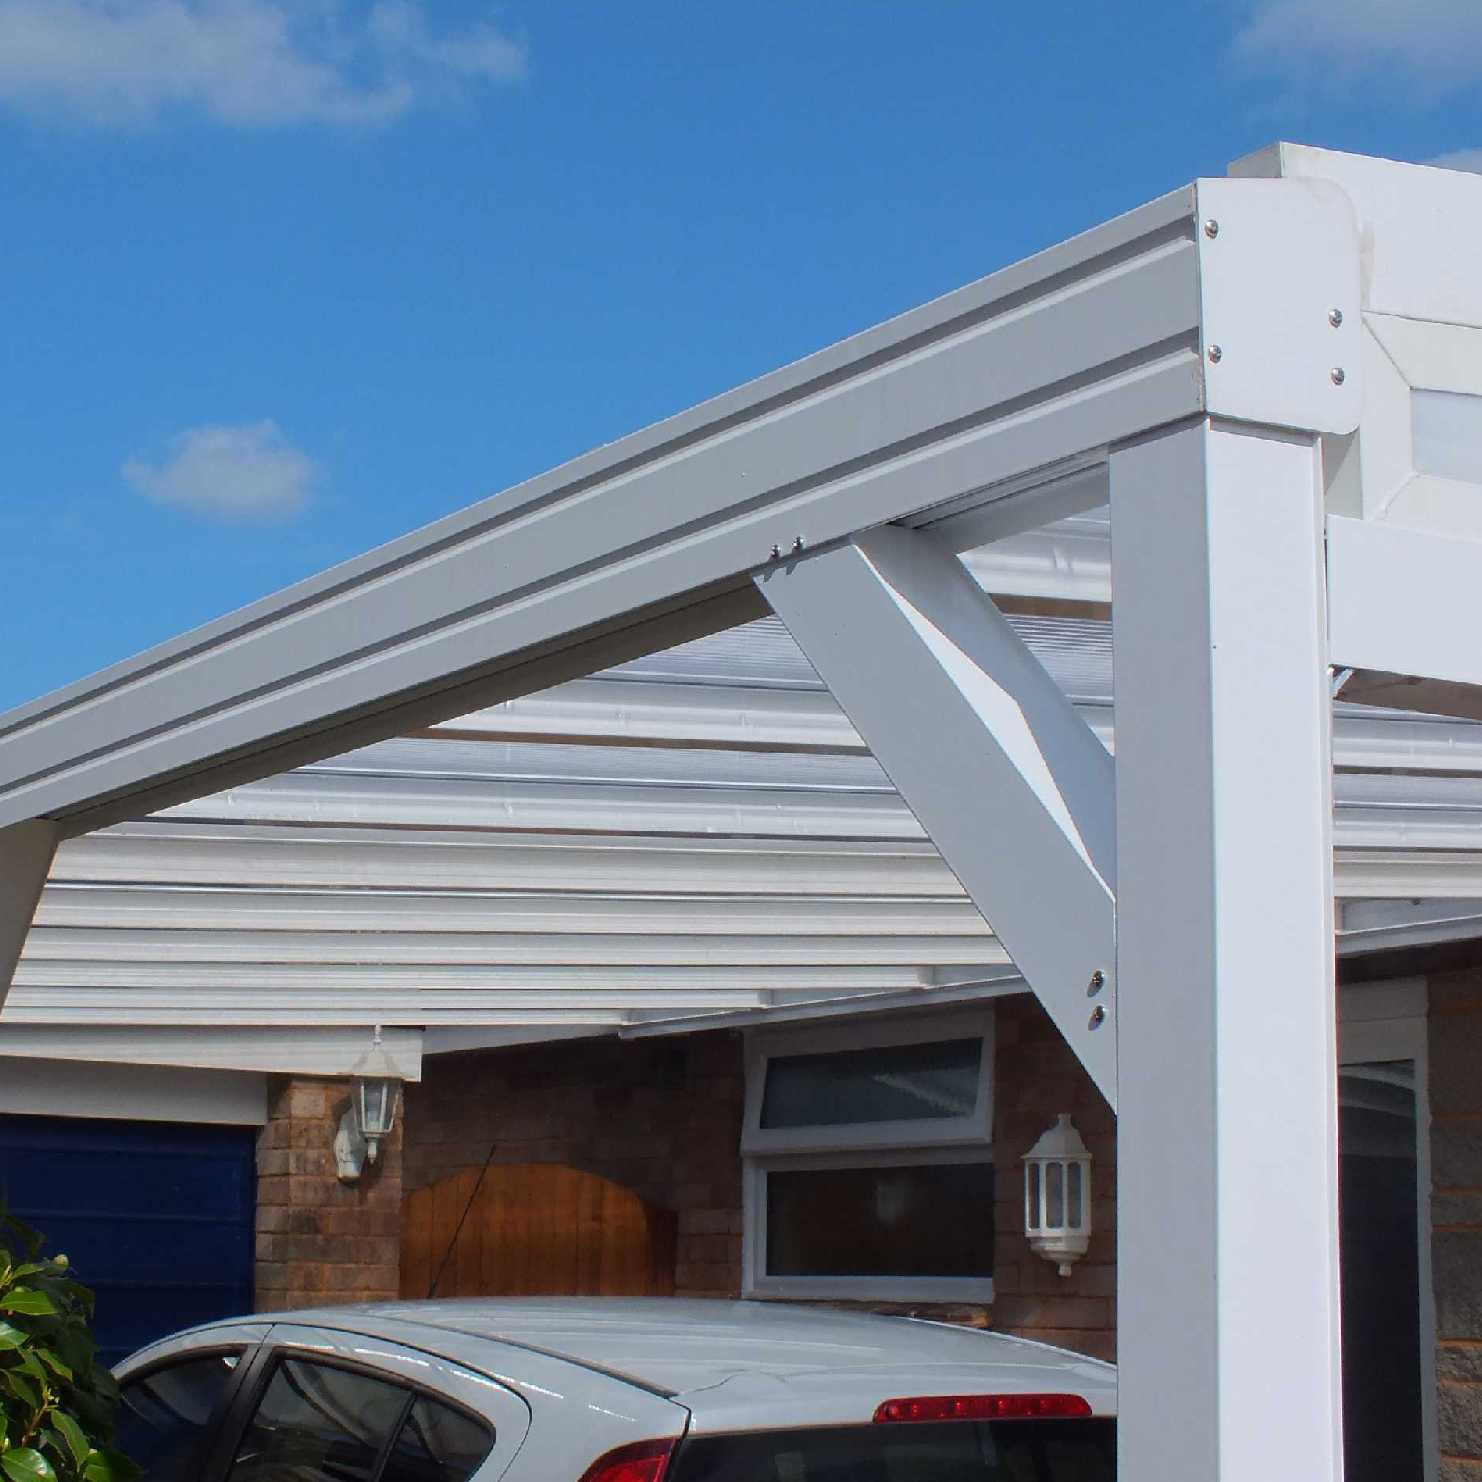 Buy Omega Smart Lean-To Canopy, White with 16mm Polycarbonate Glazing - 6.0m (W) x 4.5m (P), (3) Supporting Posts online today